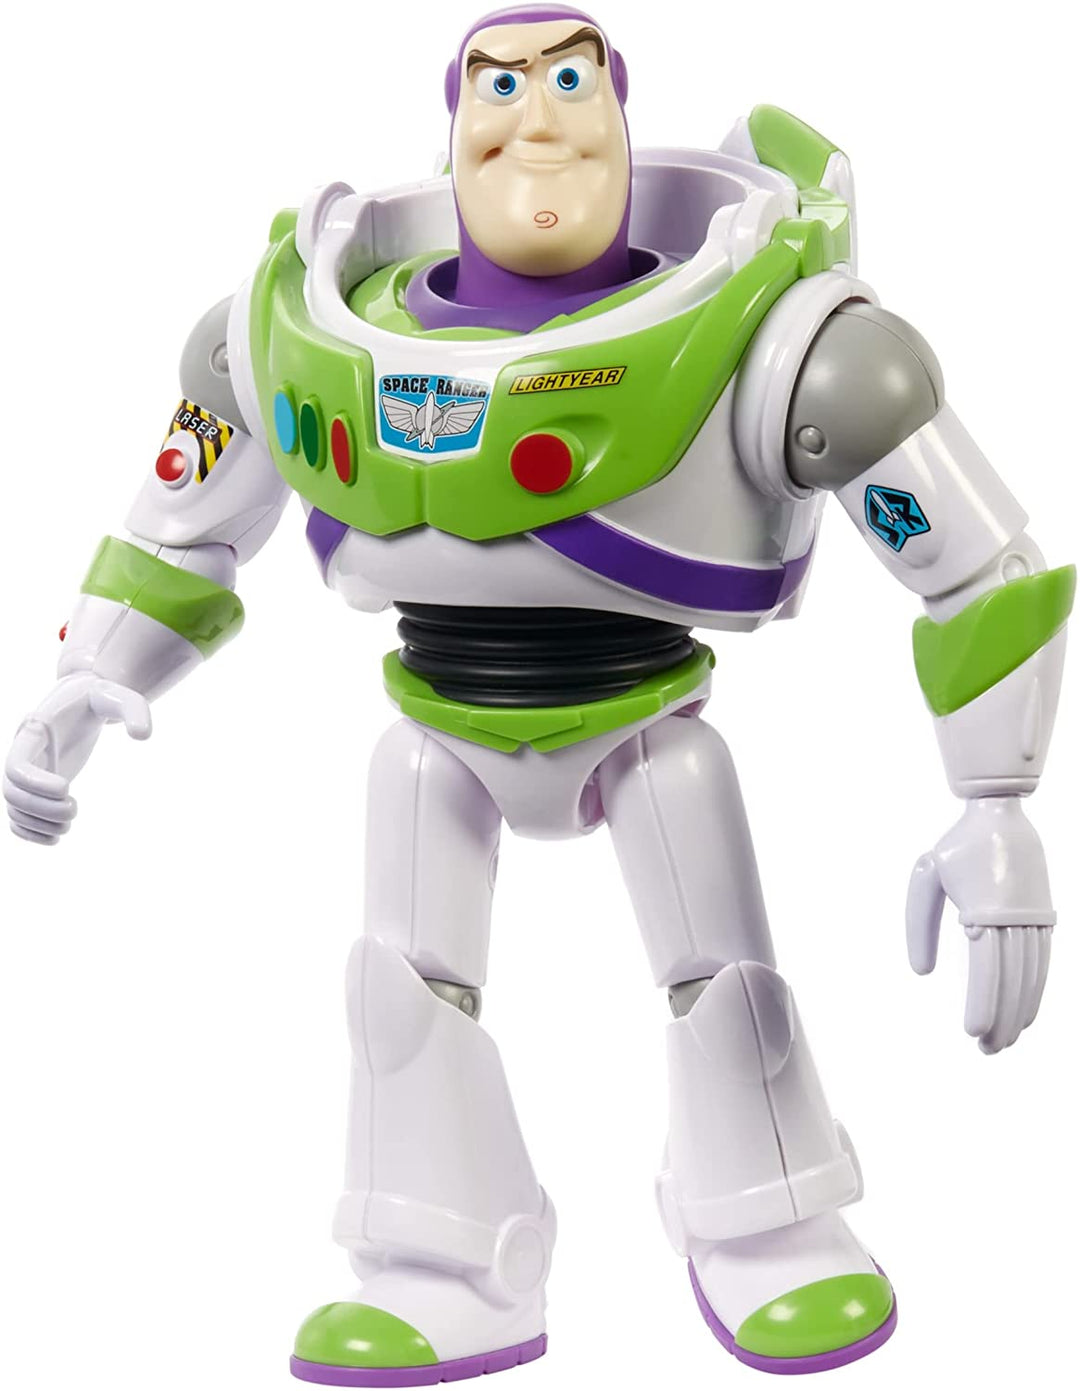 ?Disney Pixar Buzz Lightyear Large Action Figure 12 in Scale Highly Posable Auth